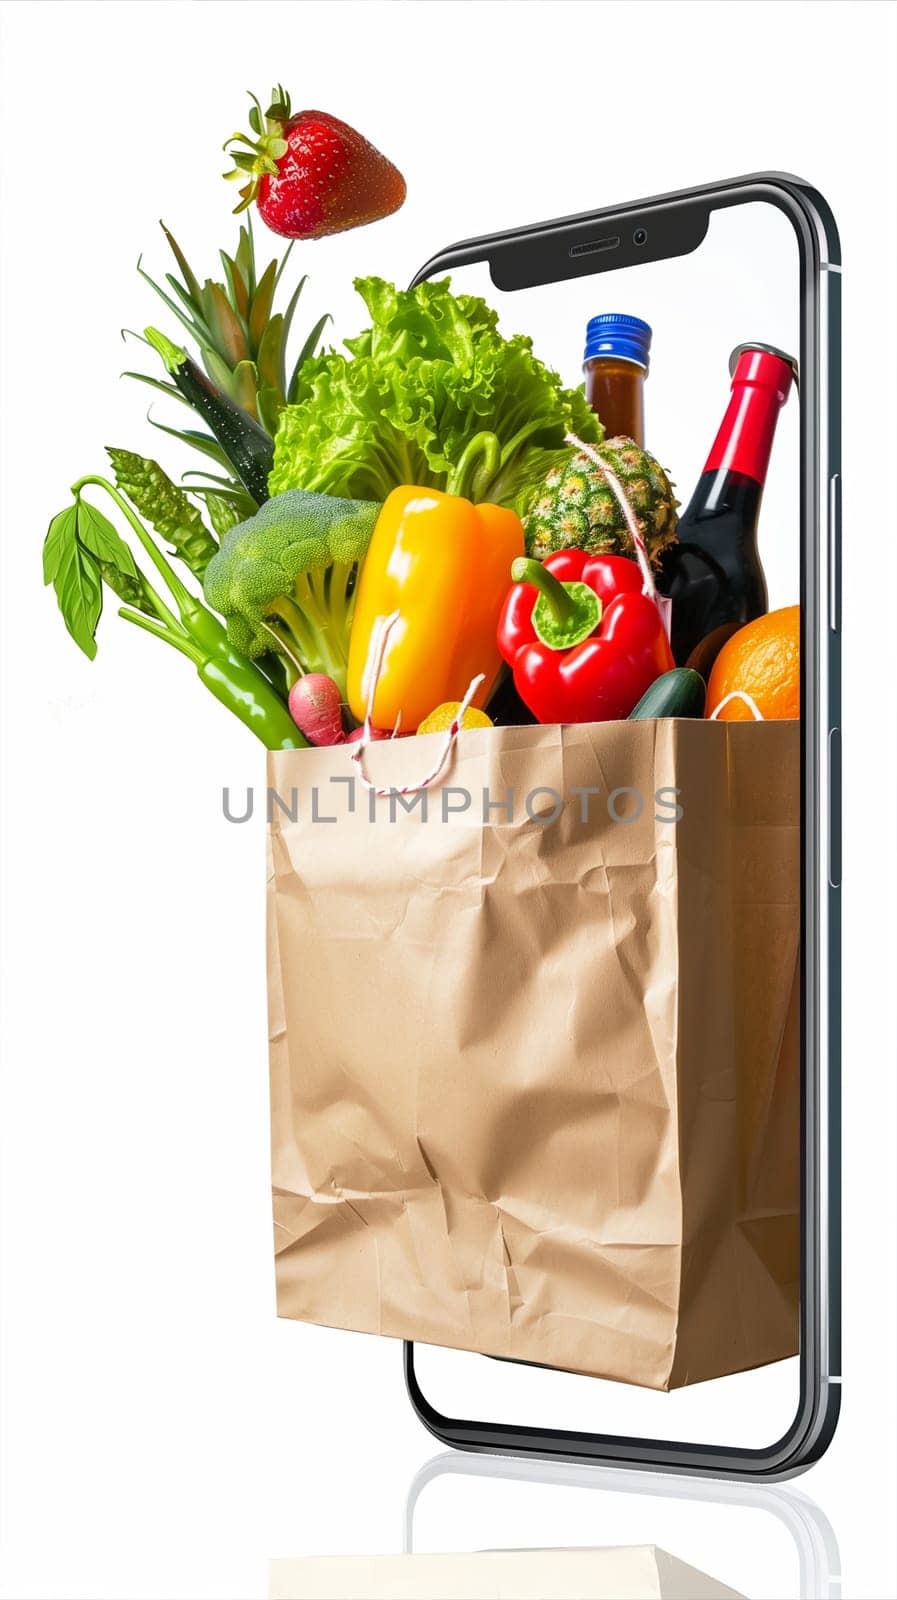 Shopping Bag Filled With Fruits and Vegetables by Sd28DimoN_1976